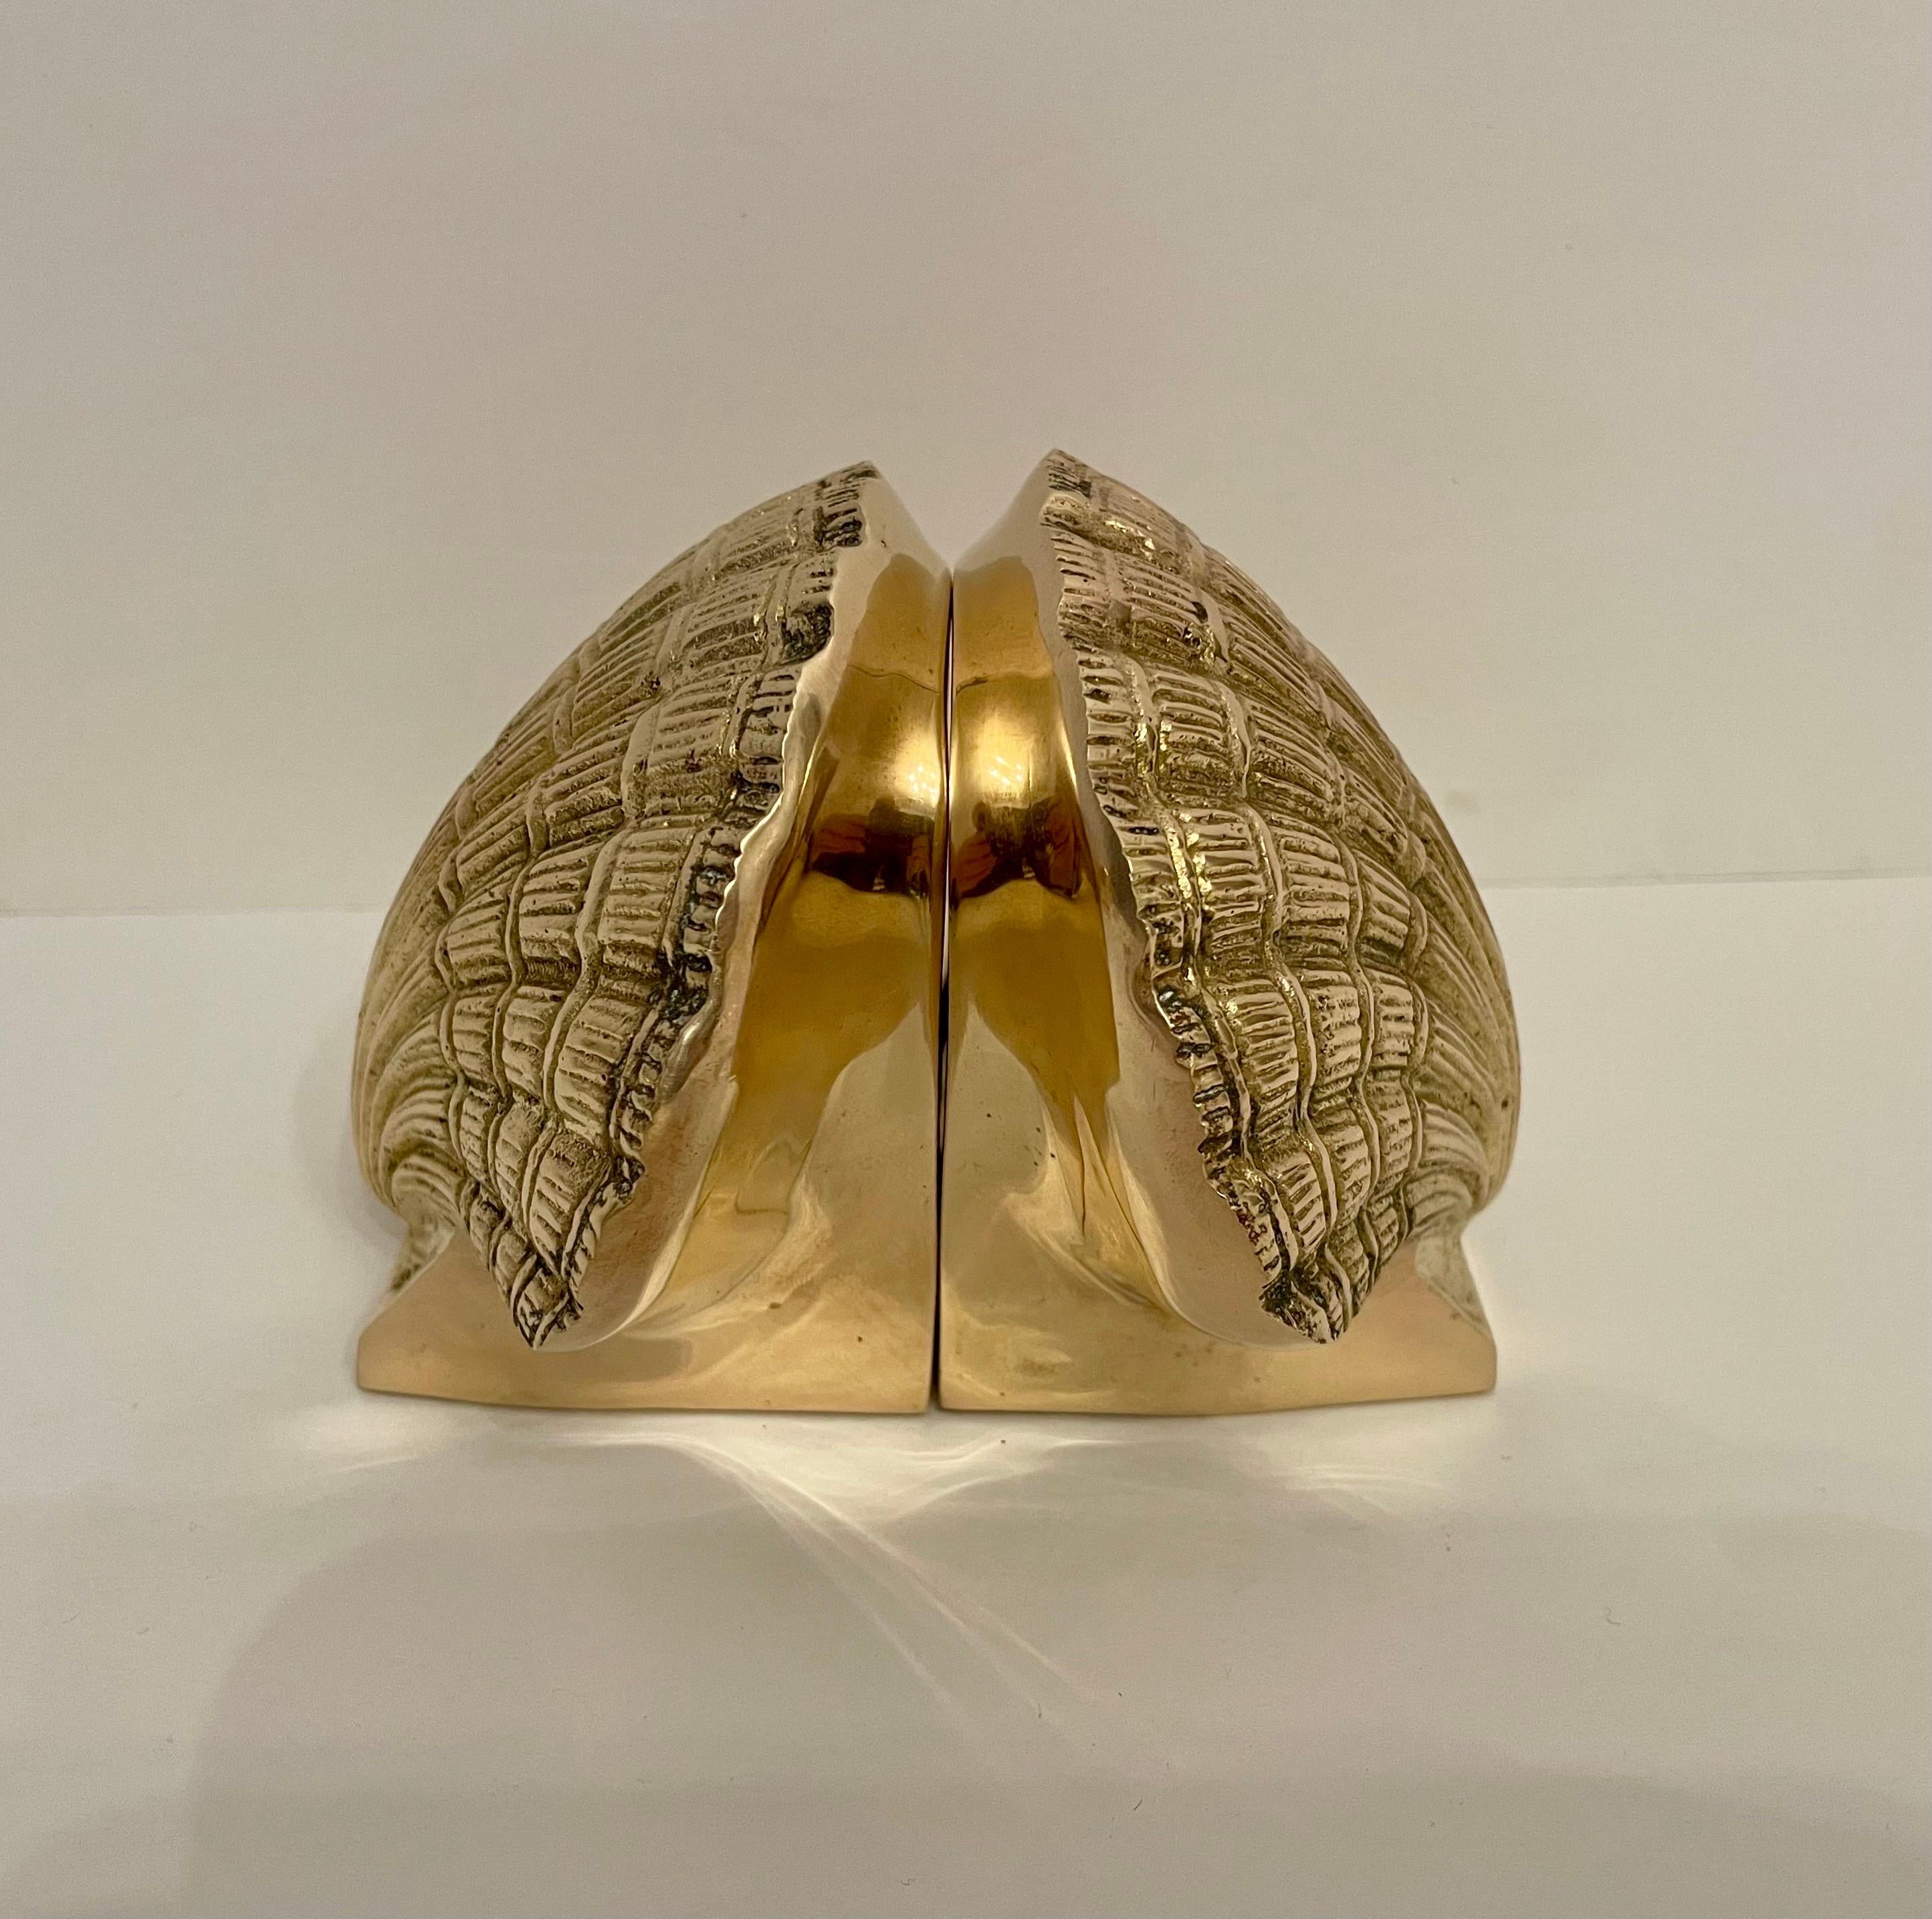 Cast Pair Brass Scallop Or Clam Shell Seashell Bookends